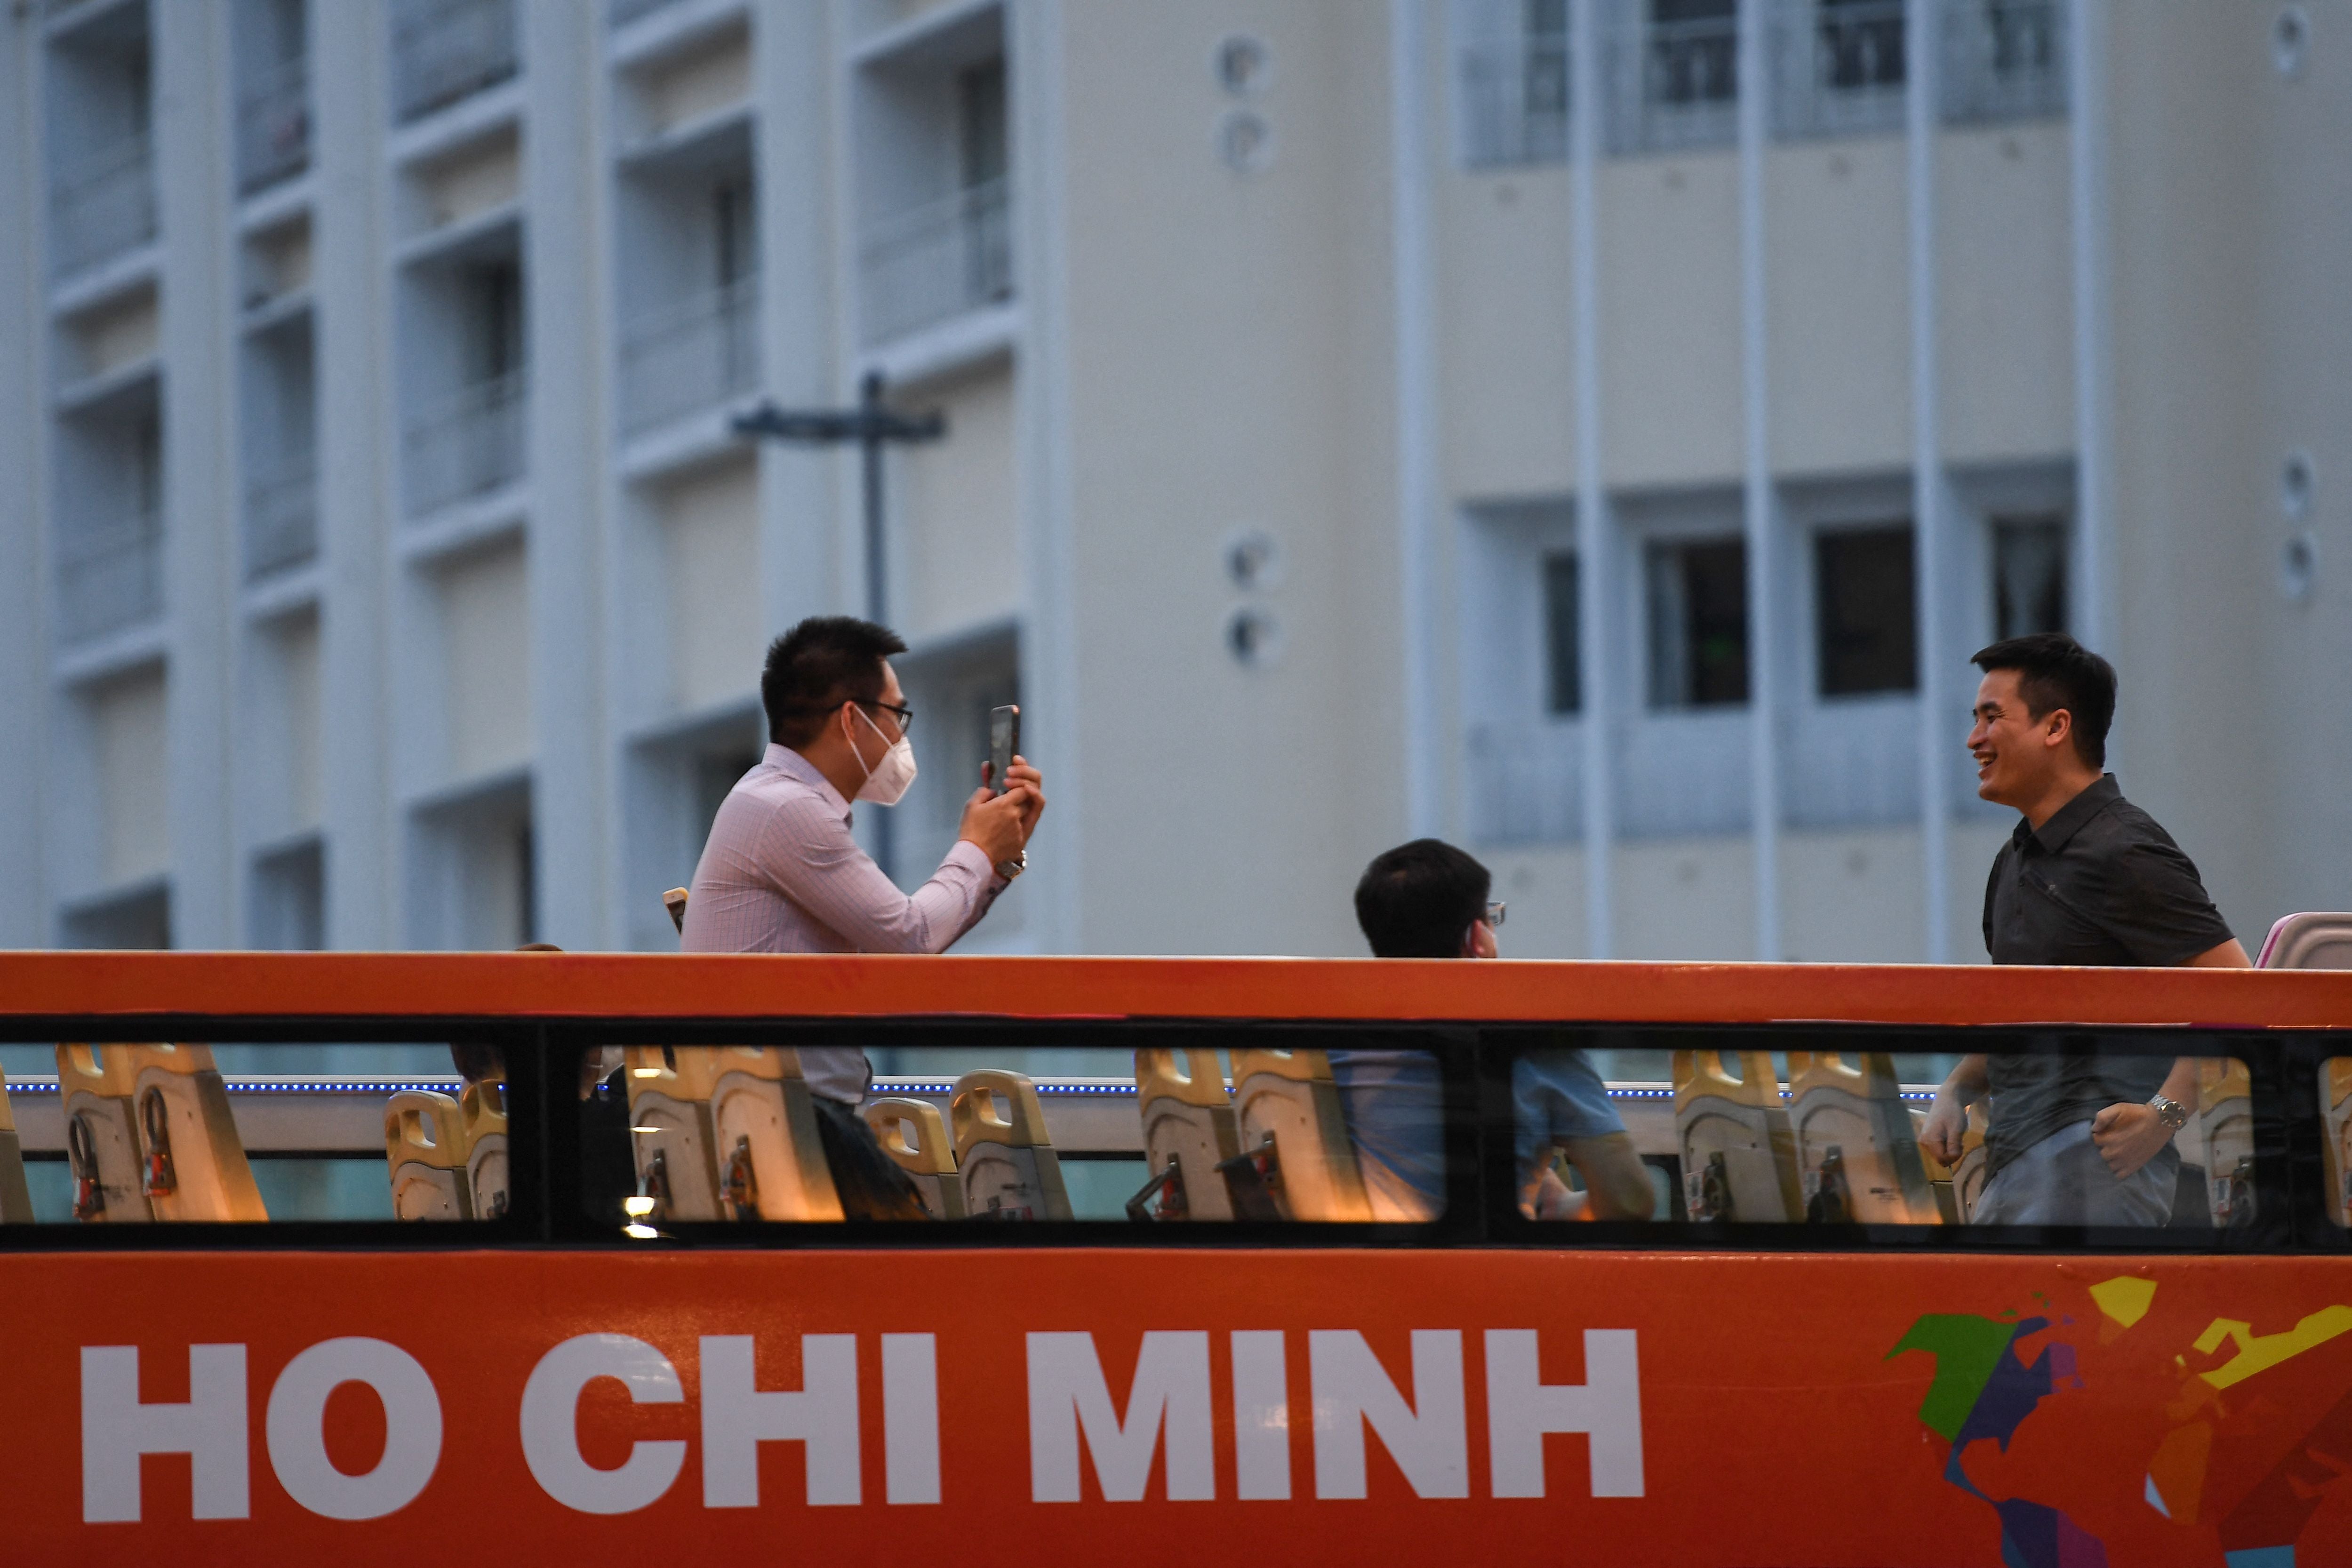 Representative: A tourist takes a photo with his mobile phone as people tour Ho Chi Minh City in a sightseeing bus on 1 December 2021